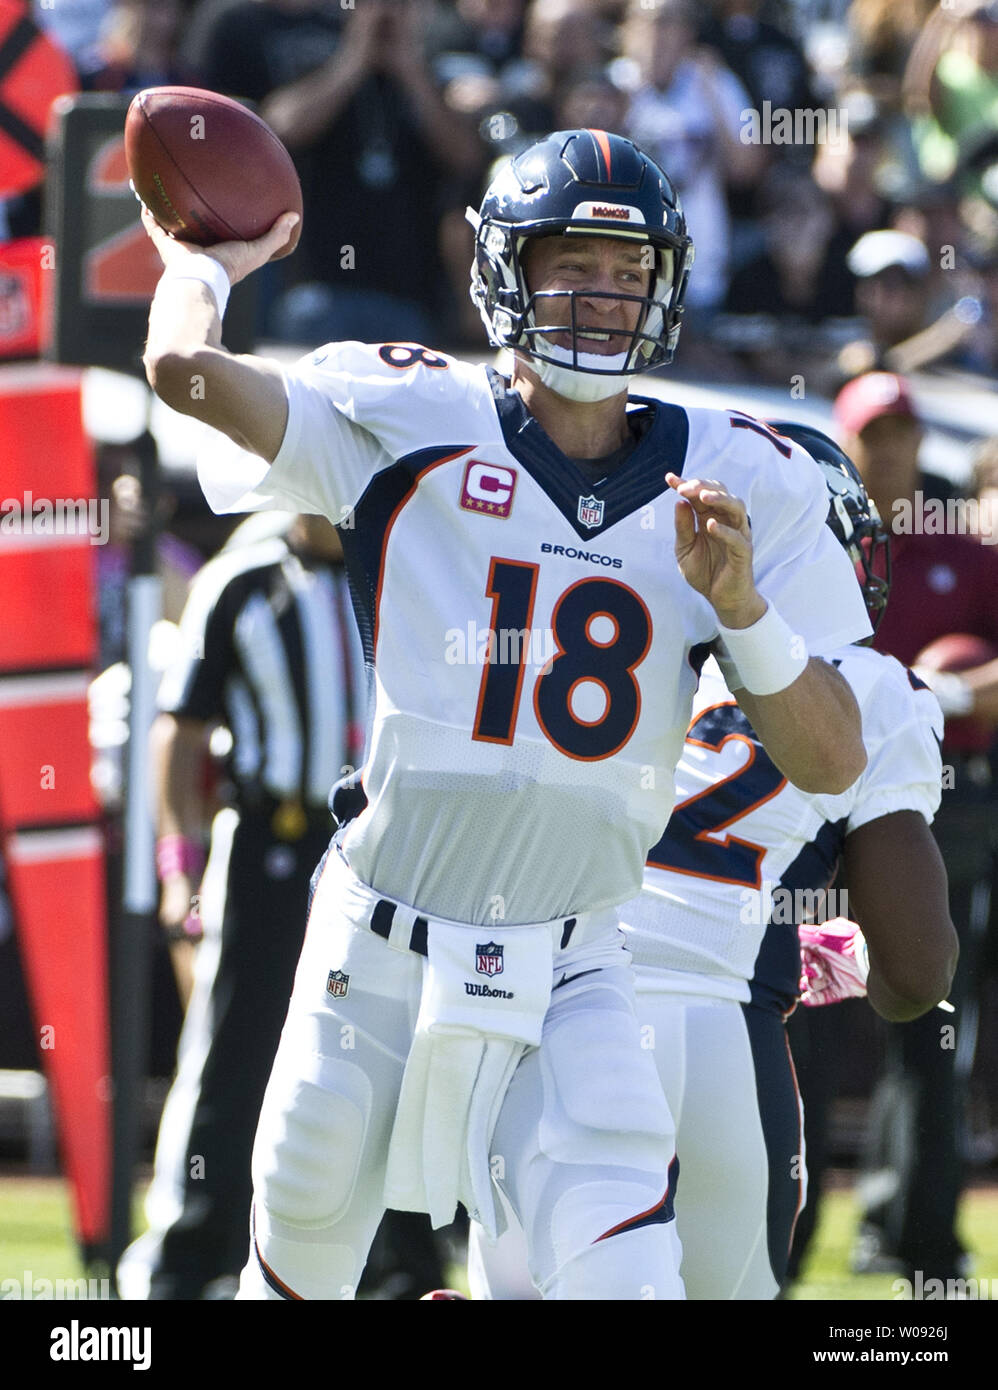 Denver Broncos QB Peyton Manning passes against the Oakland Raiders in the first quarter at O.co Coliseum in Oakland, California on October 11, 2015. The Broncos defeated the Raiders 16-10.  Photo by Terry Schmitt/UPI Stock Photo